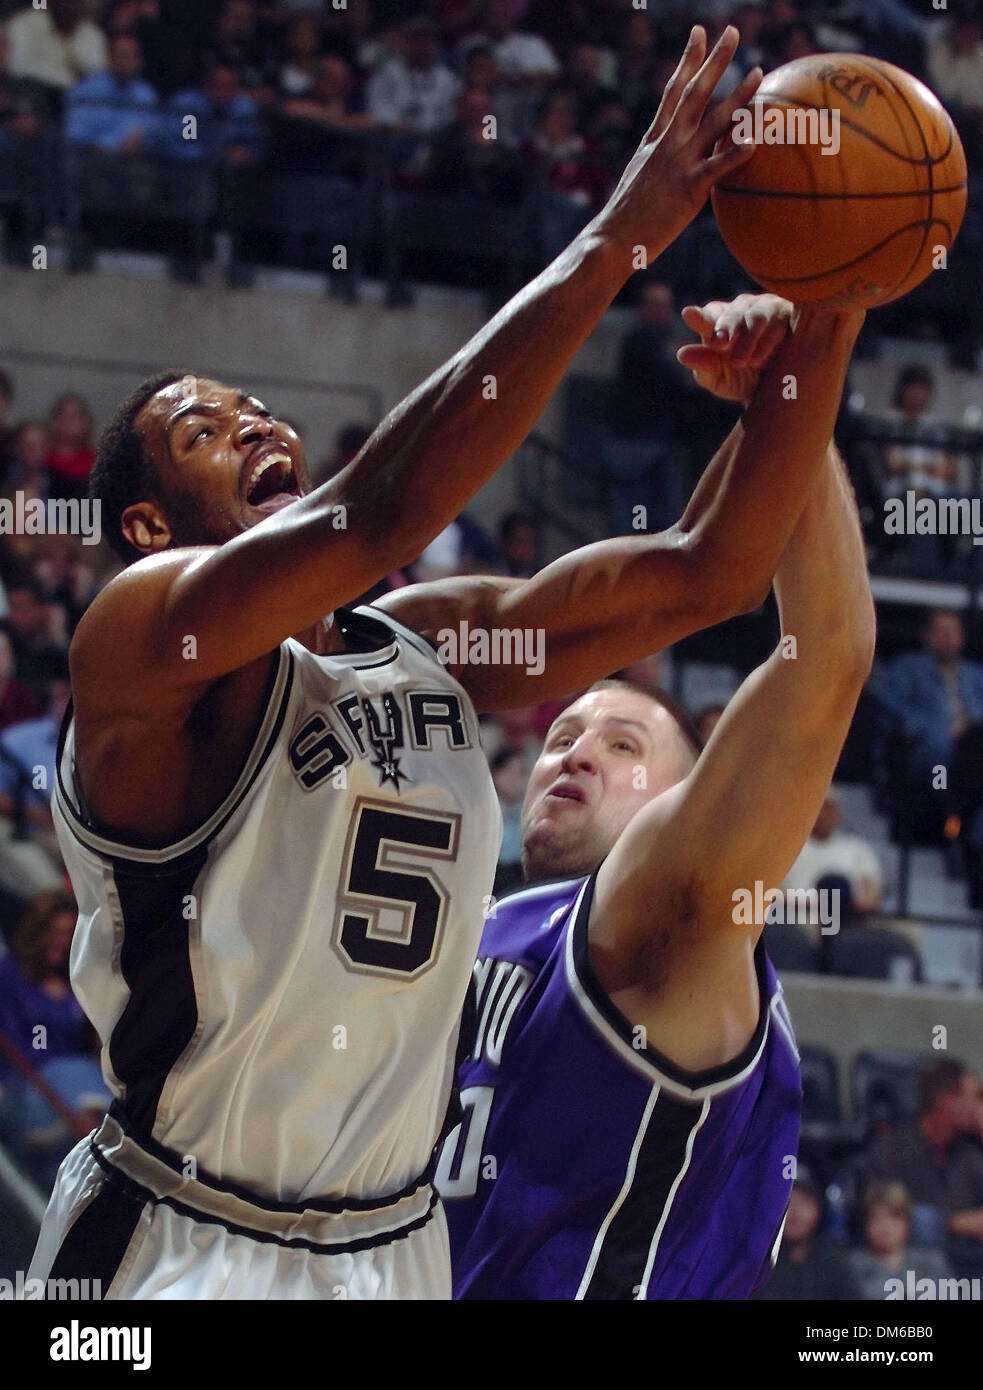 Jan 27, 2005; San Antonio, TX, USA; ROBERT HORRY is fouled by GREG OSTERTAG on a shot in the first half of the game at the SBC Center. San Antonio won 90-80. Stock Photo